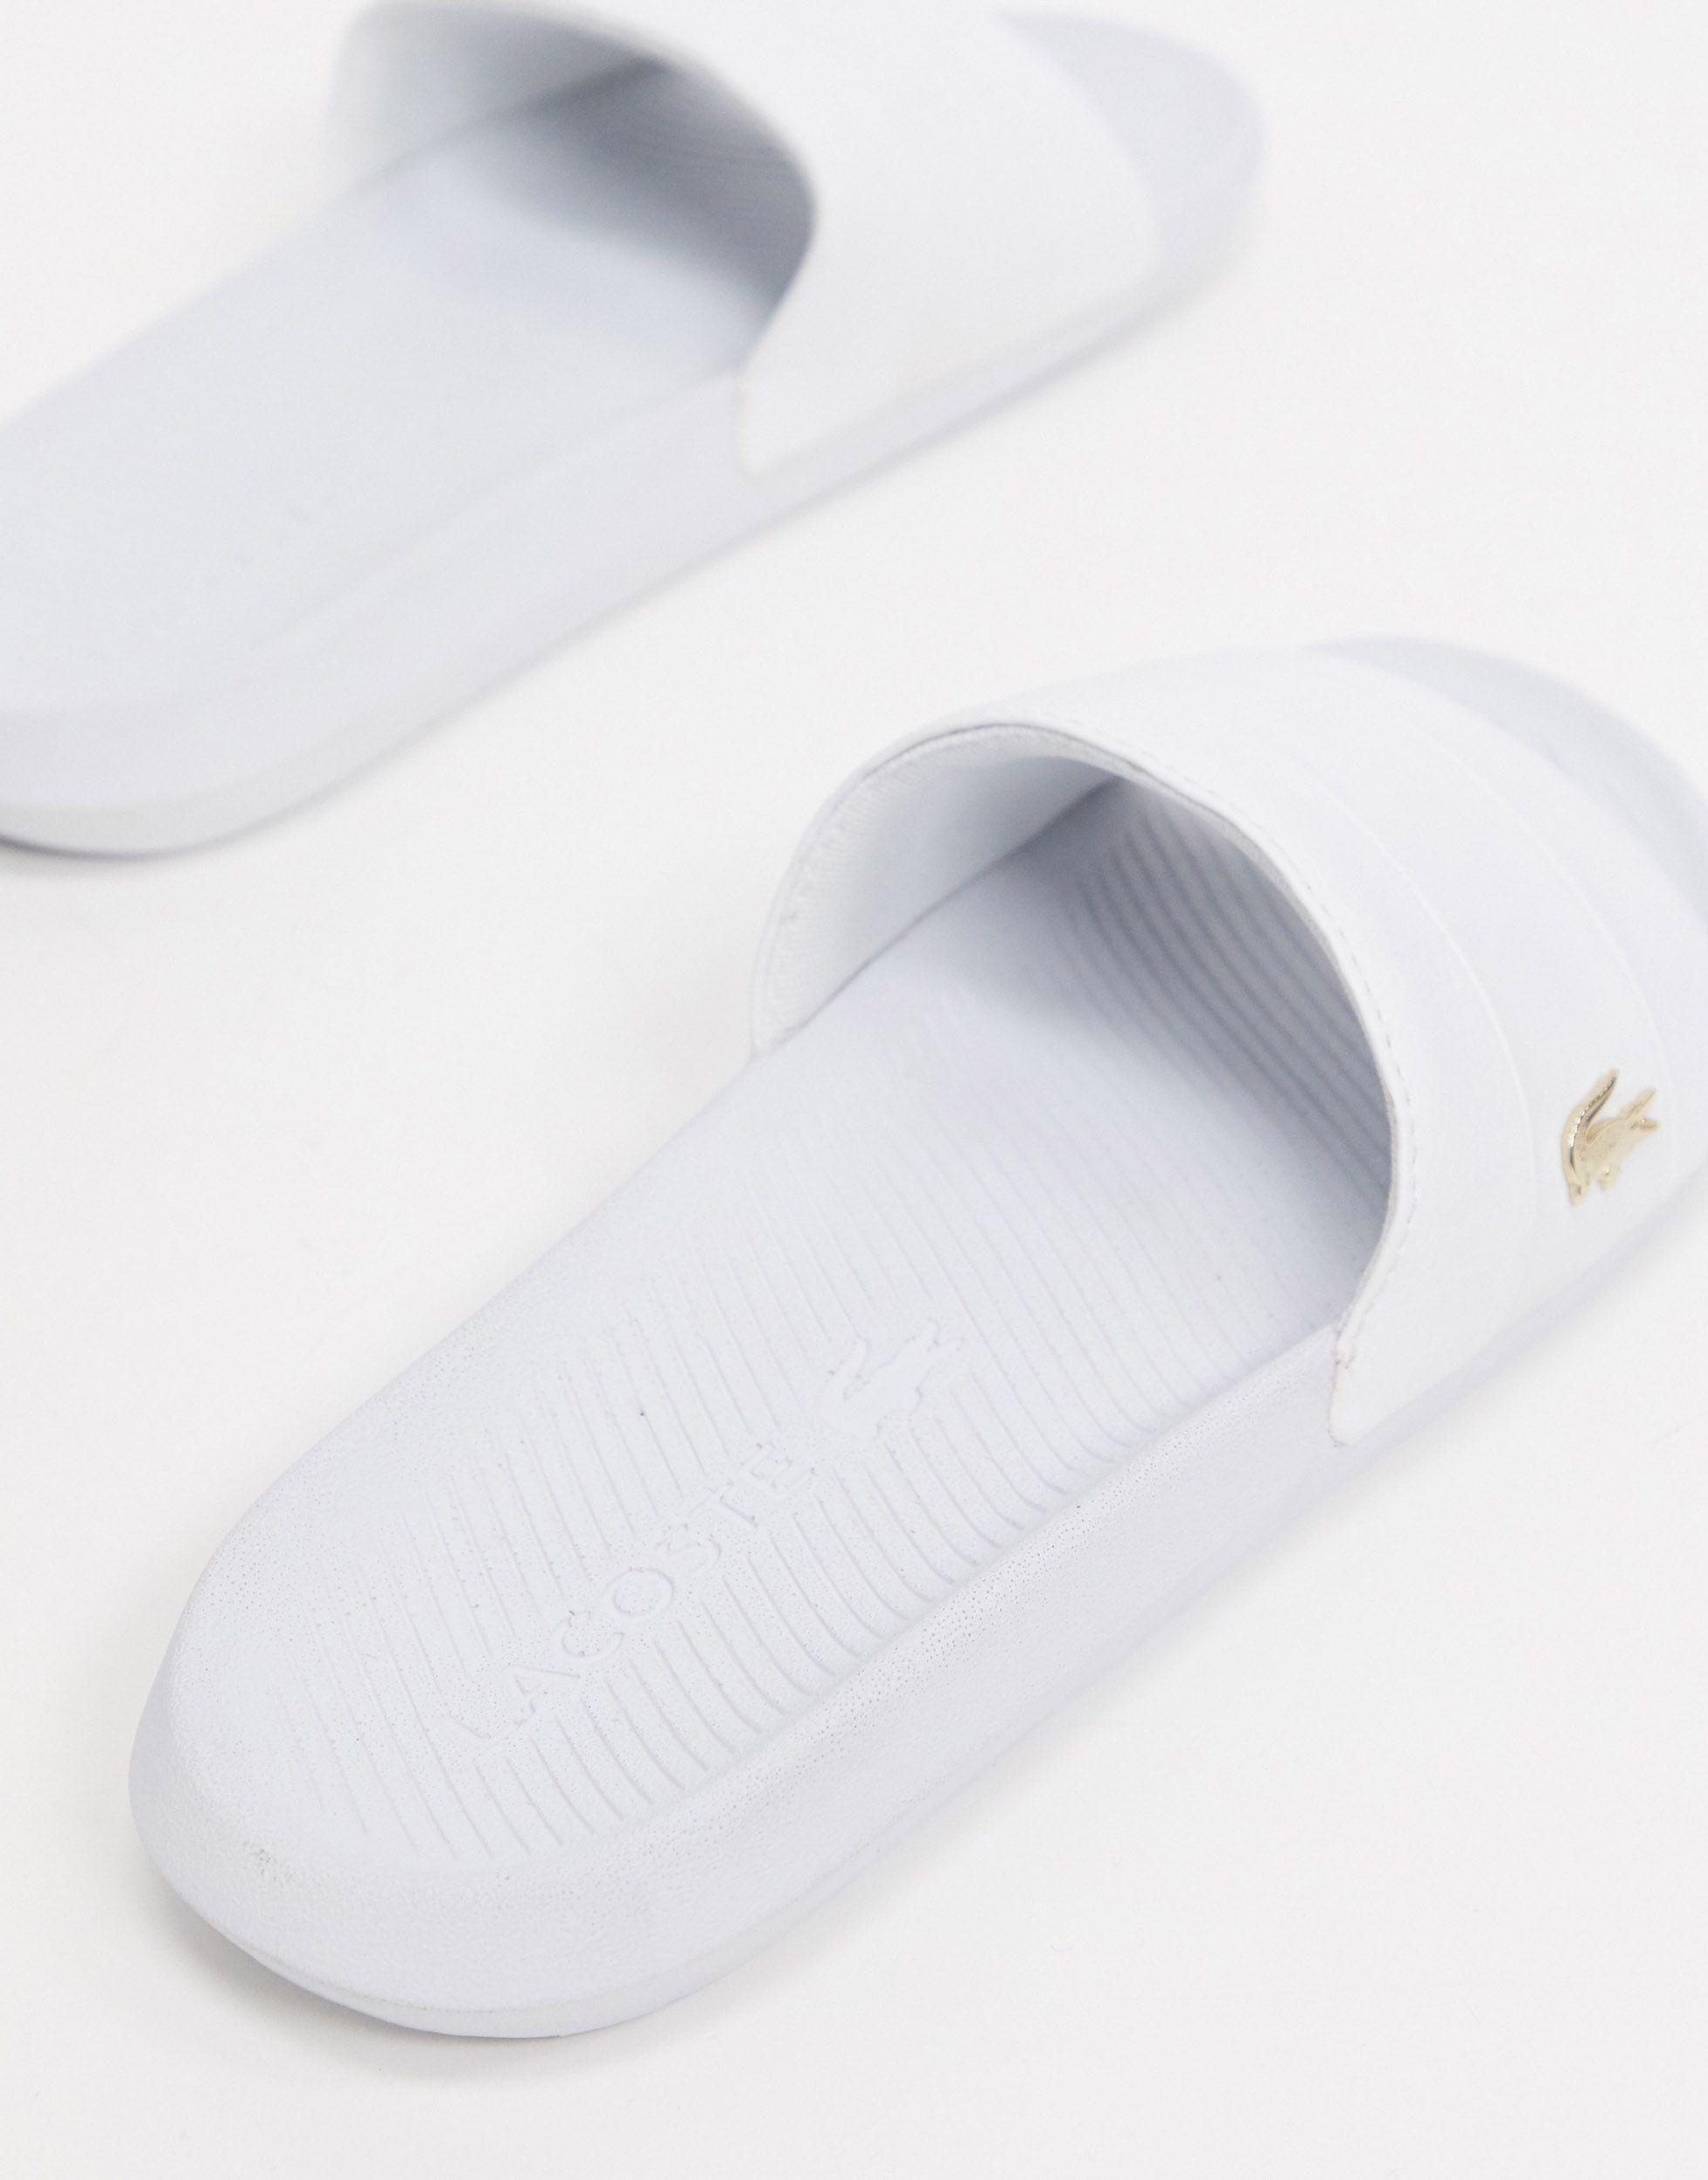 white and gold lacoste slides